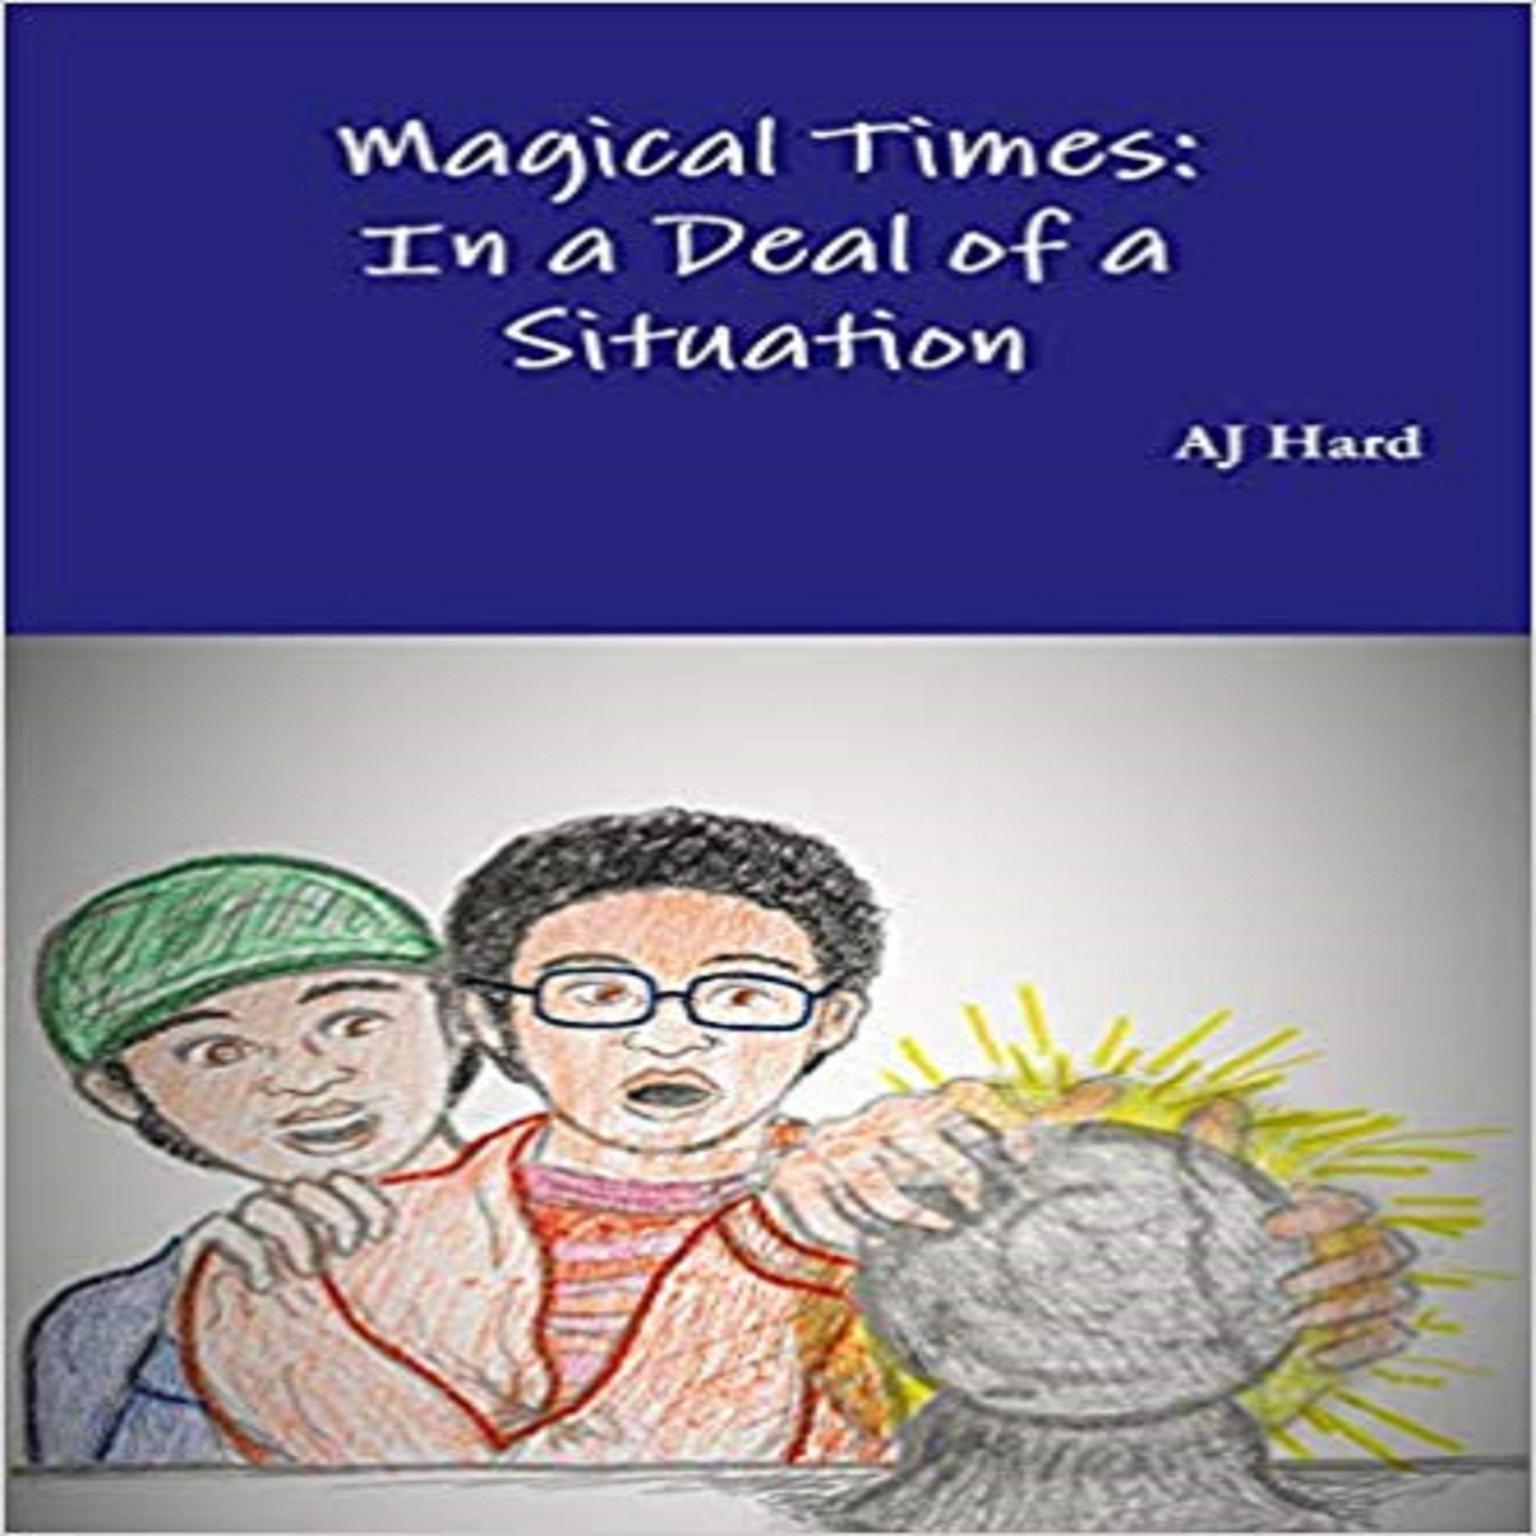 Magical Times: In A Deal of a Situation (Abridged) Audiobook, by AJ Hard